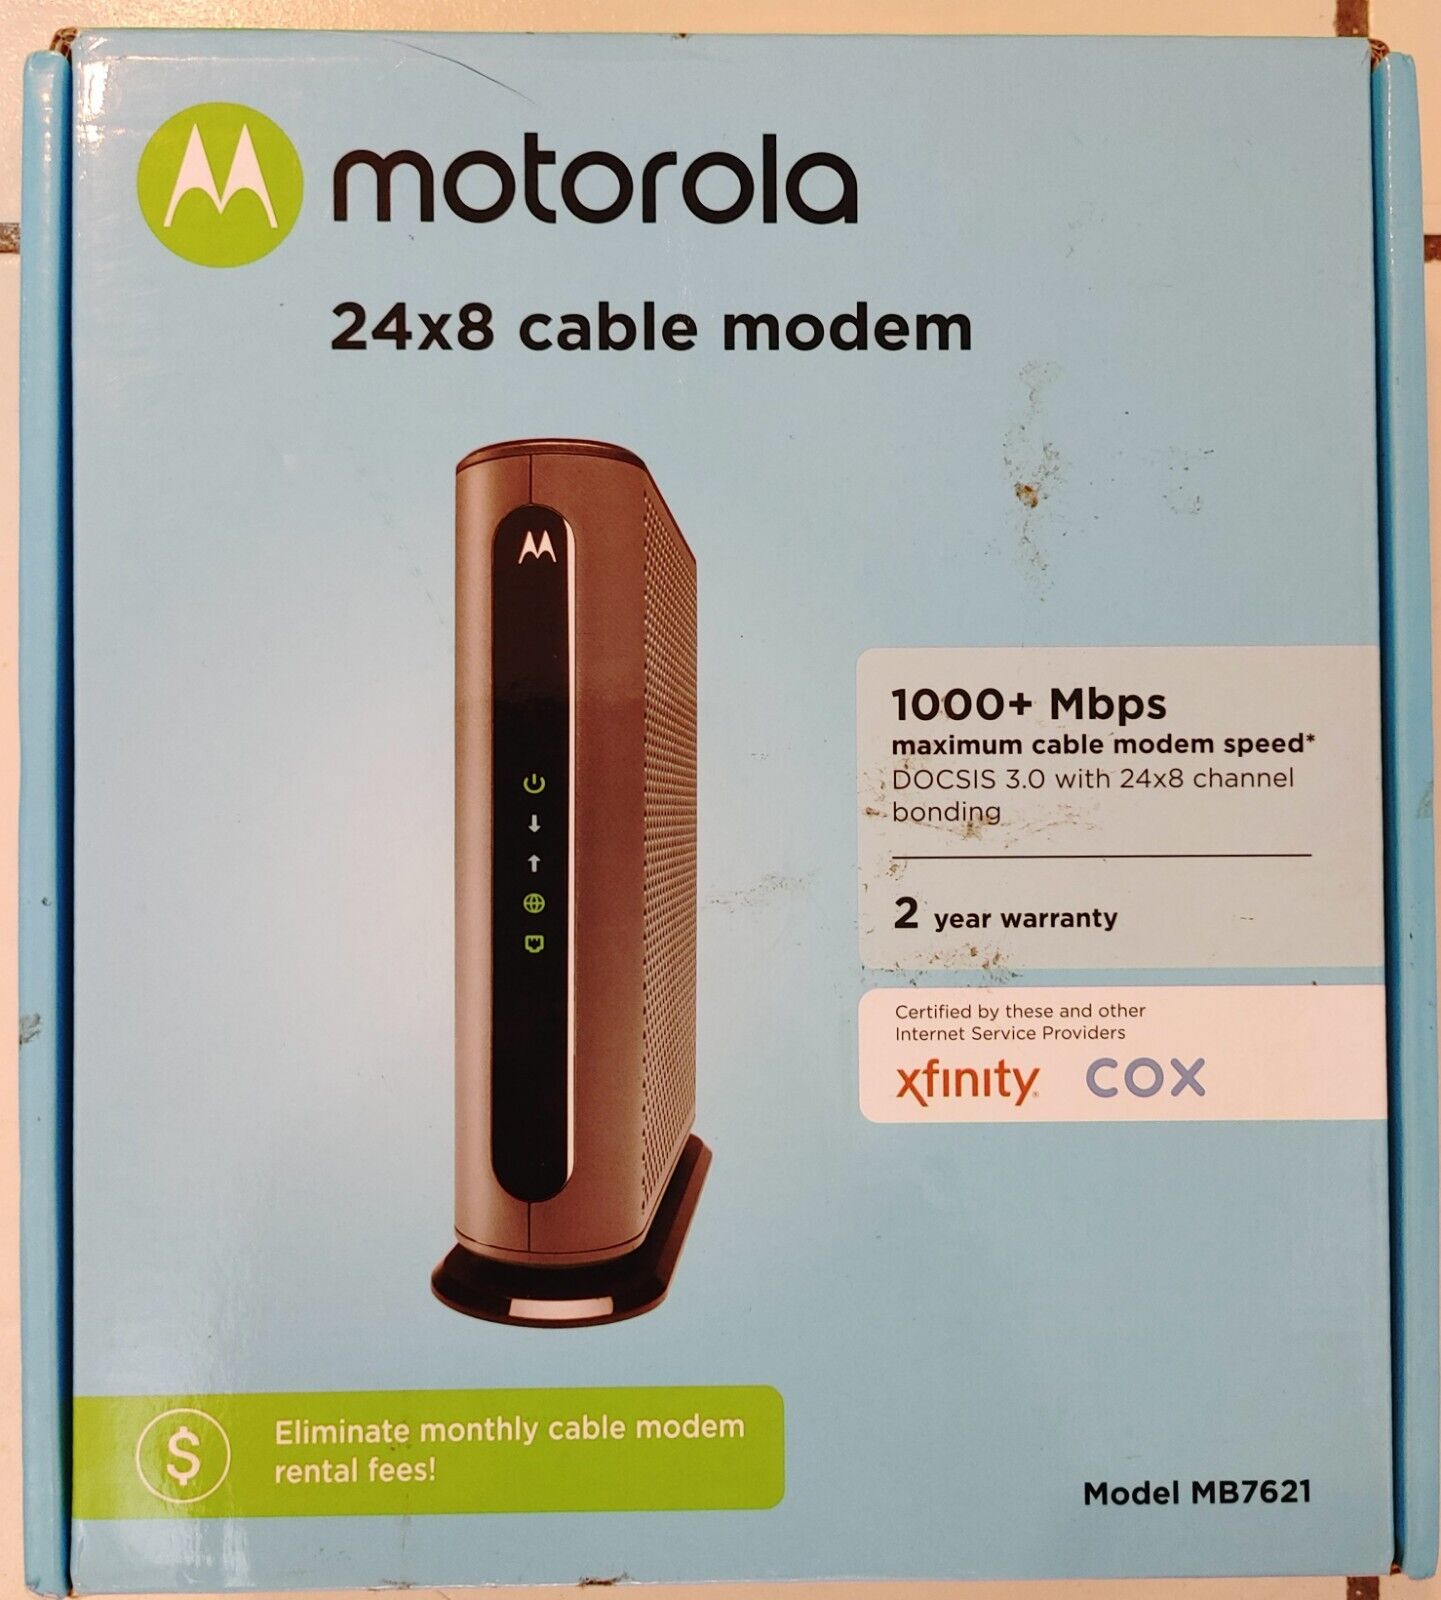 Motorola 16x4 Cable Modem & AC1900 WiFi Router for Xfinity/Cox/Spectrum MG7550